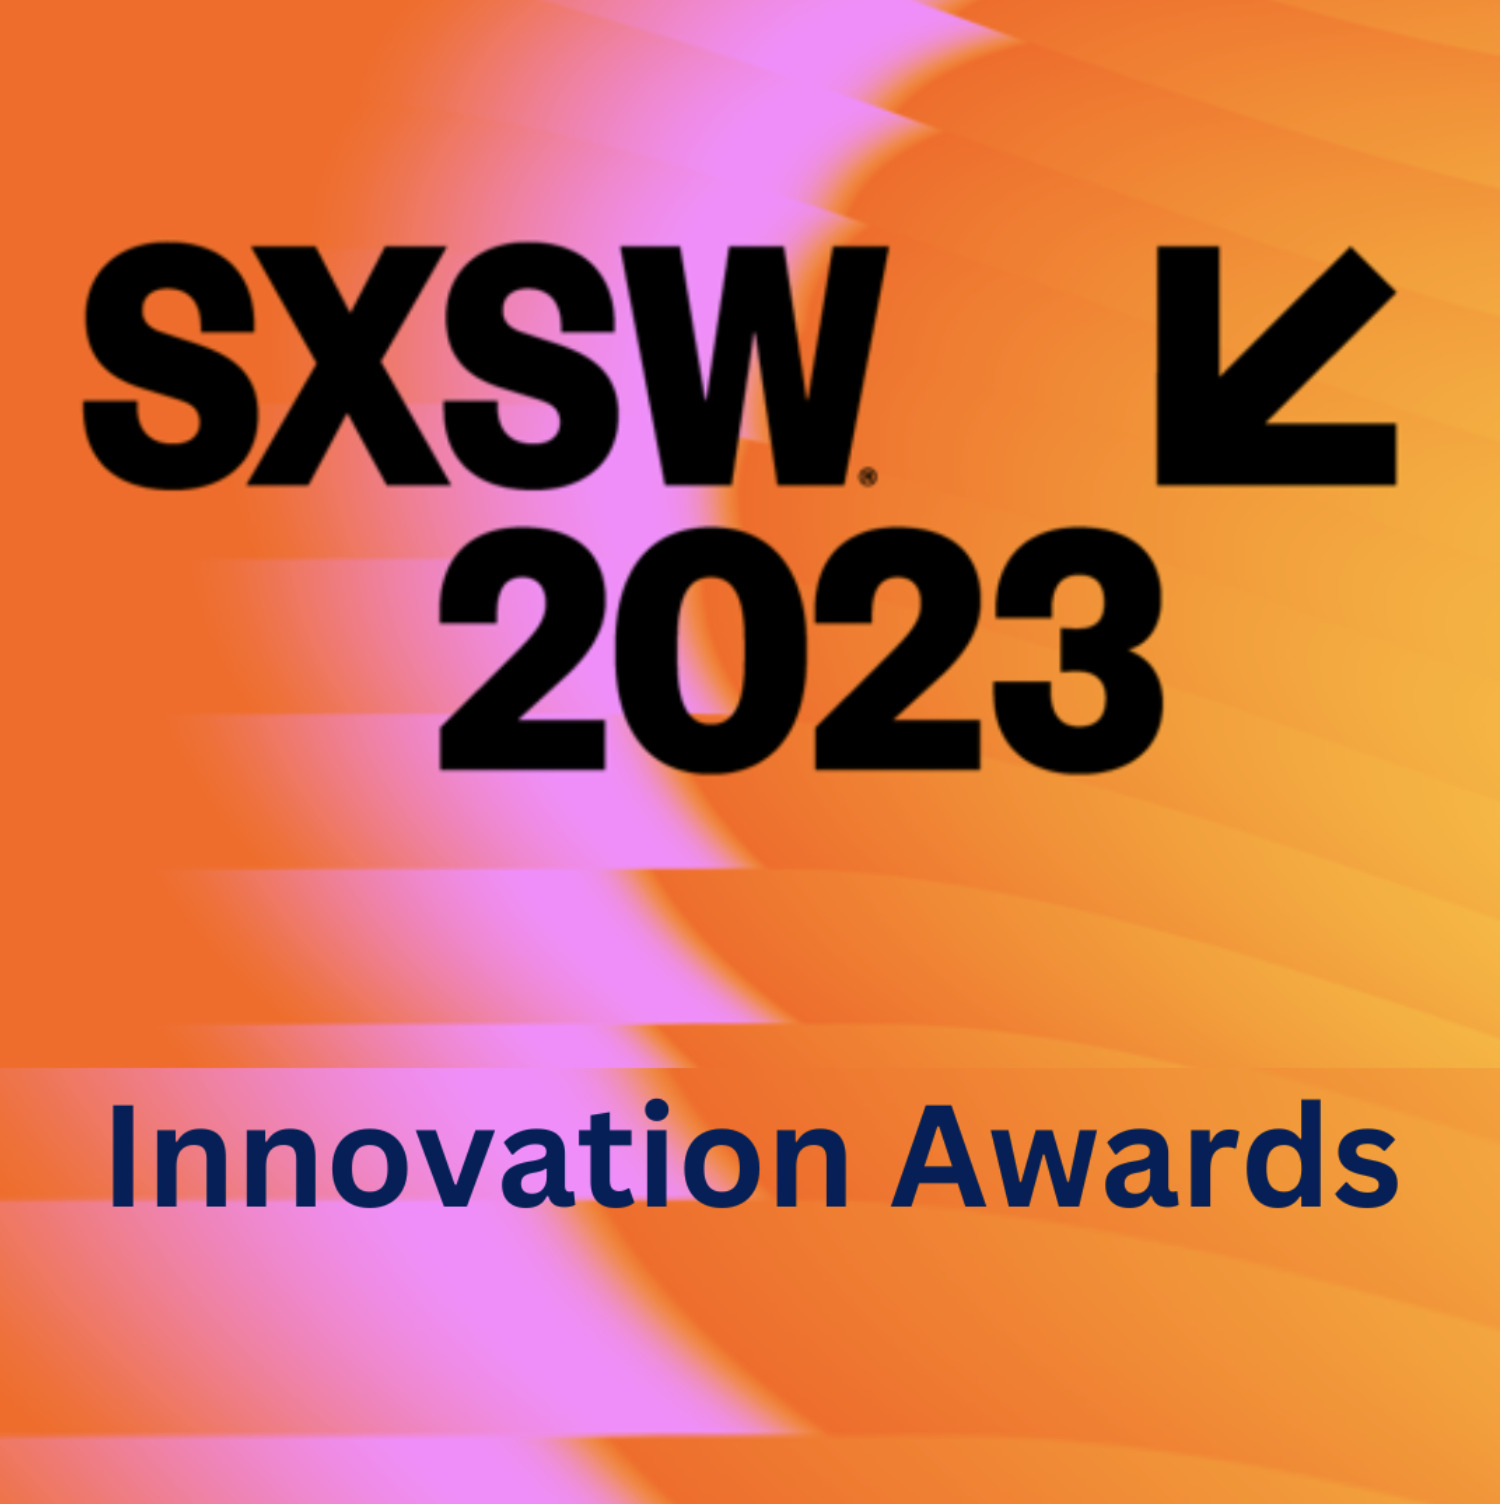 Press Release: Seattle startup Included.ai named finalist for 2023 SXSW Innovation Awards